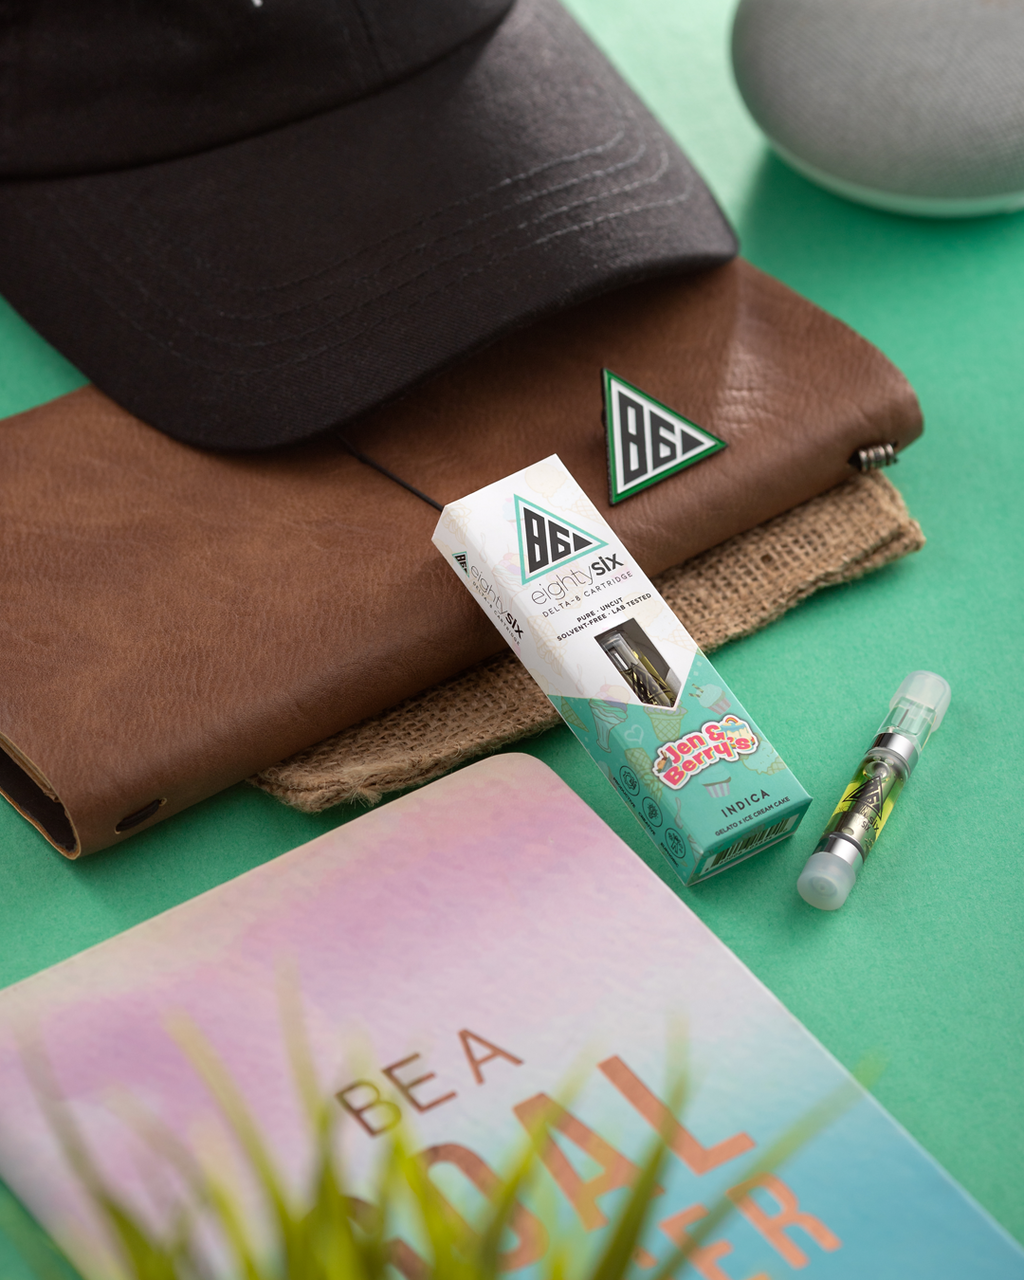 Jen and berry's delta- vape cartridge with cap, wallet, and other accessories